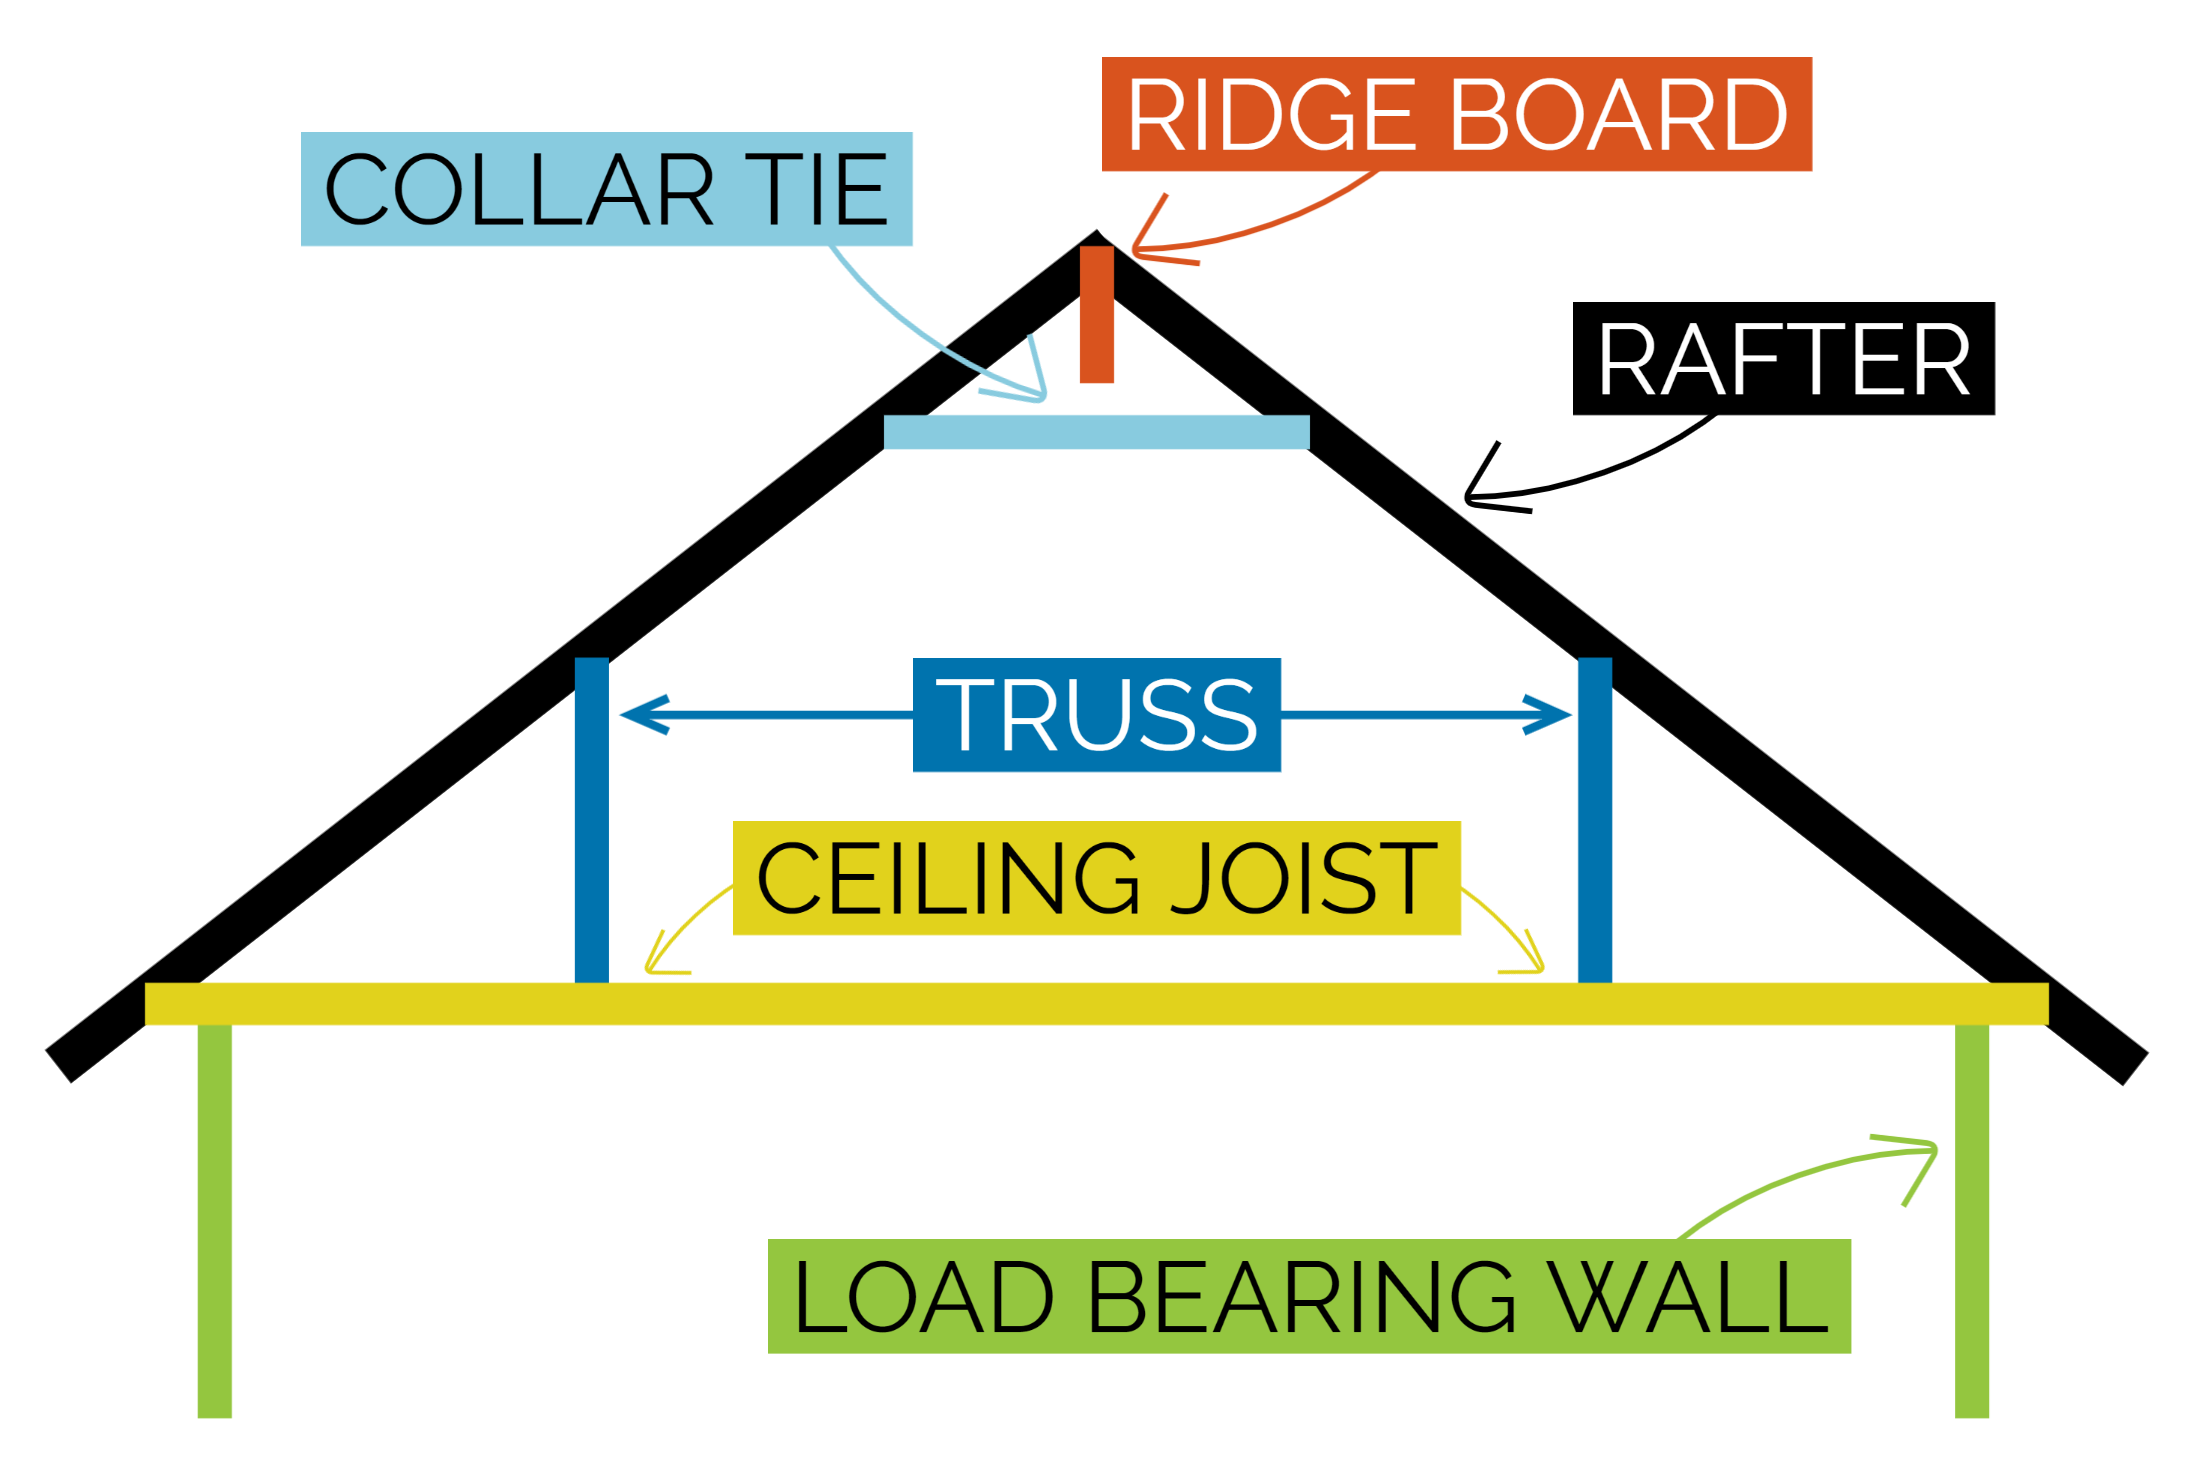 Graphic image of a house with labels that describe the parts - load bearing wall, ceiling joist, truss, rafter, ridge board, collar tie. These are parts of the house you want to inspect before entering after an earthquake.